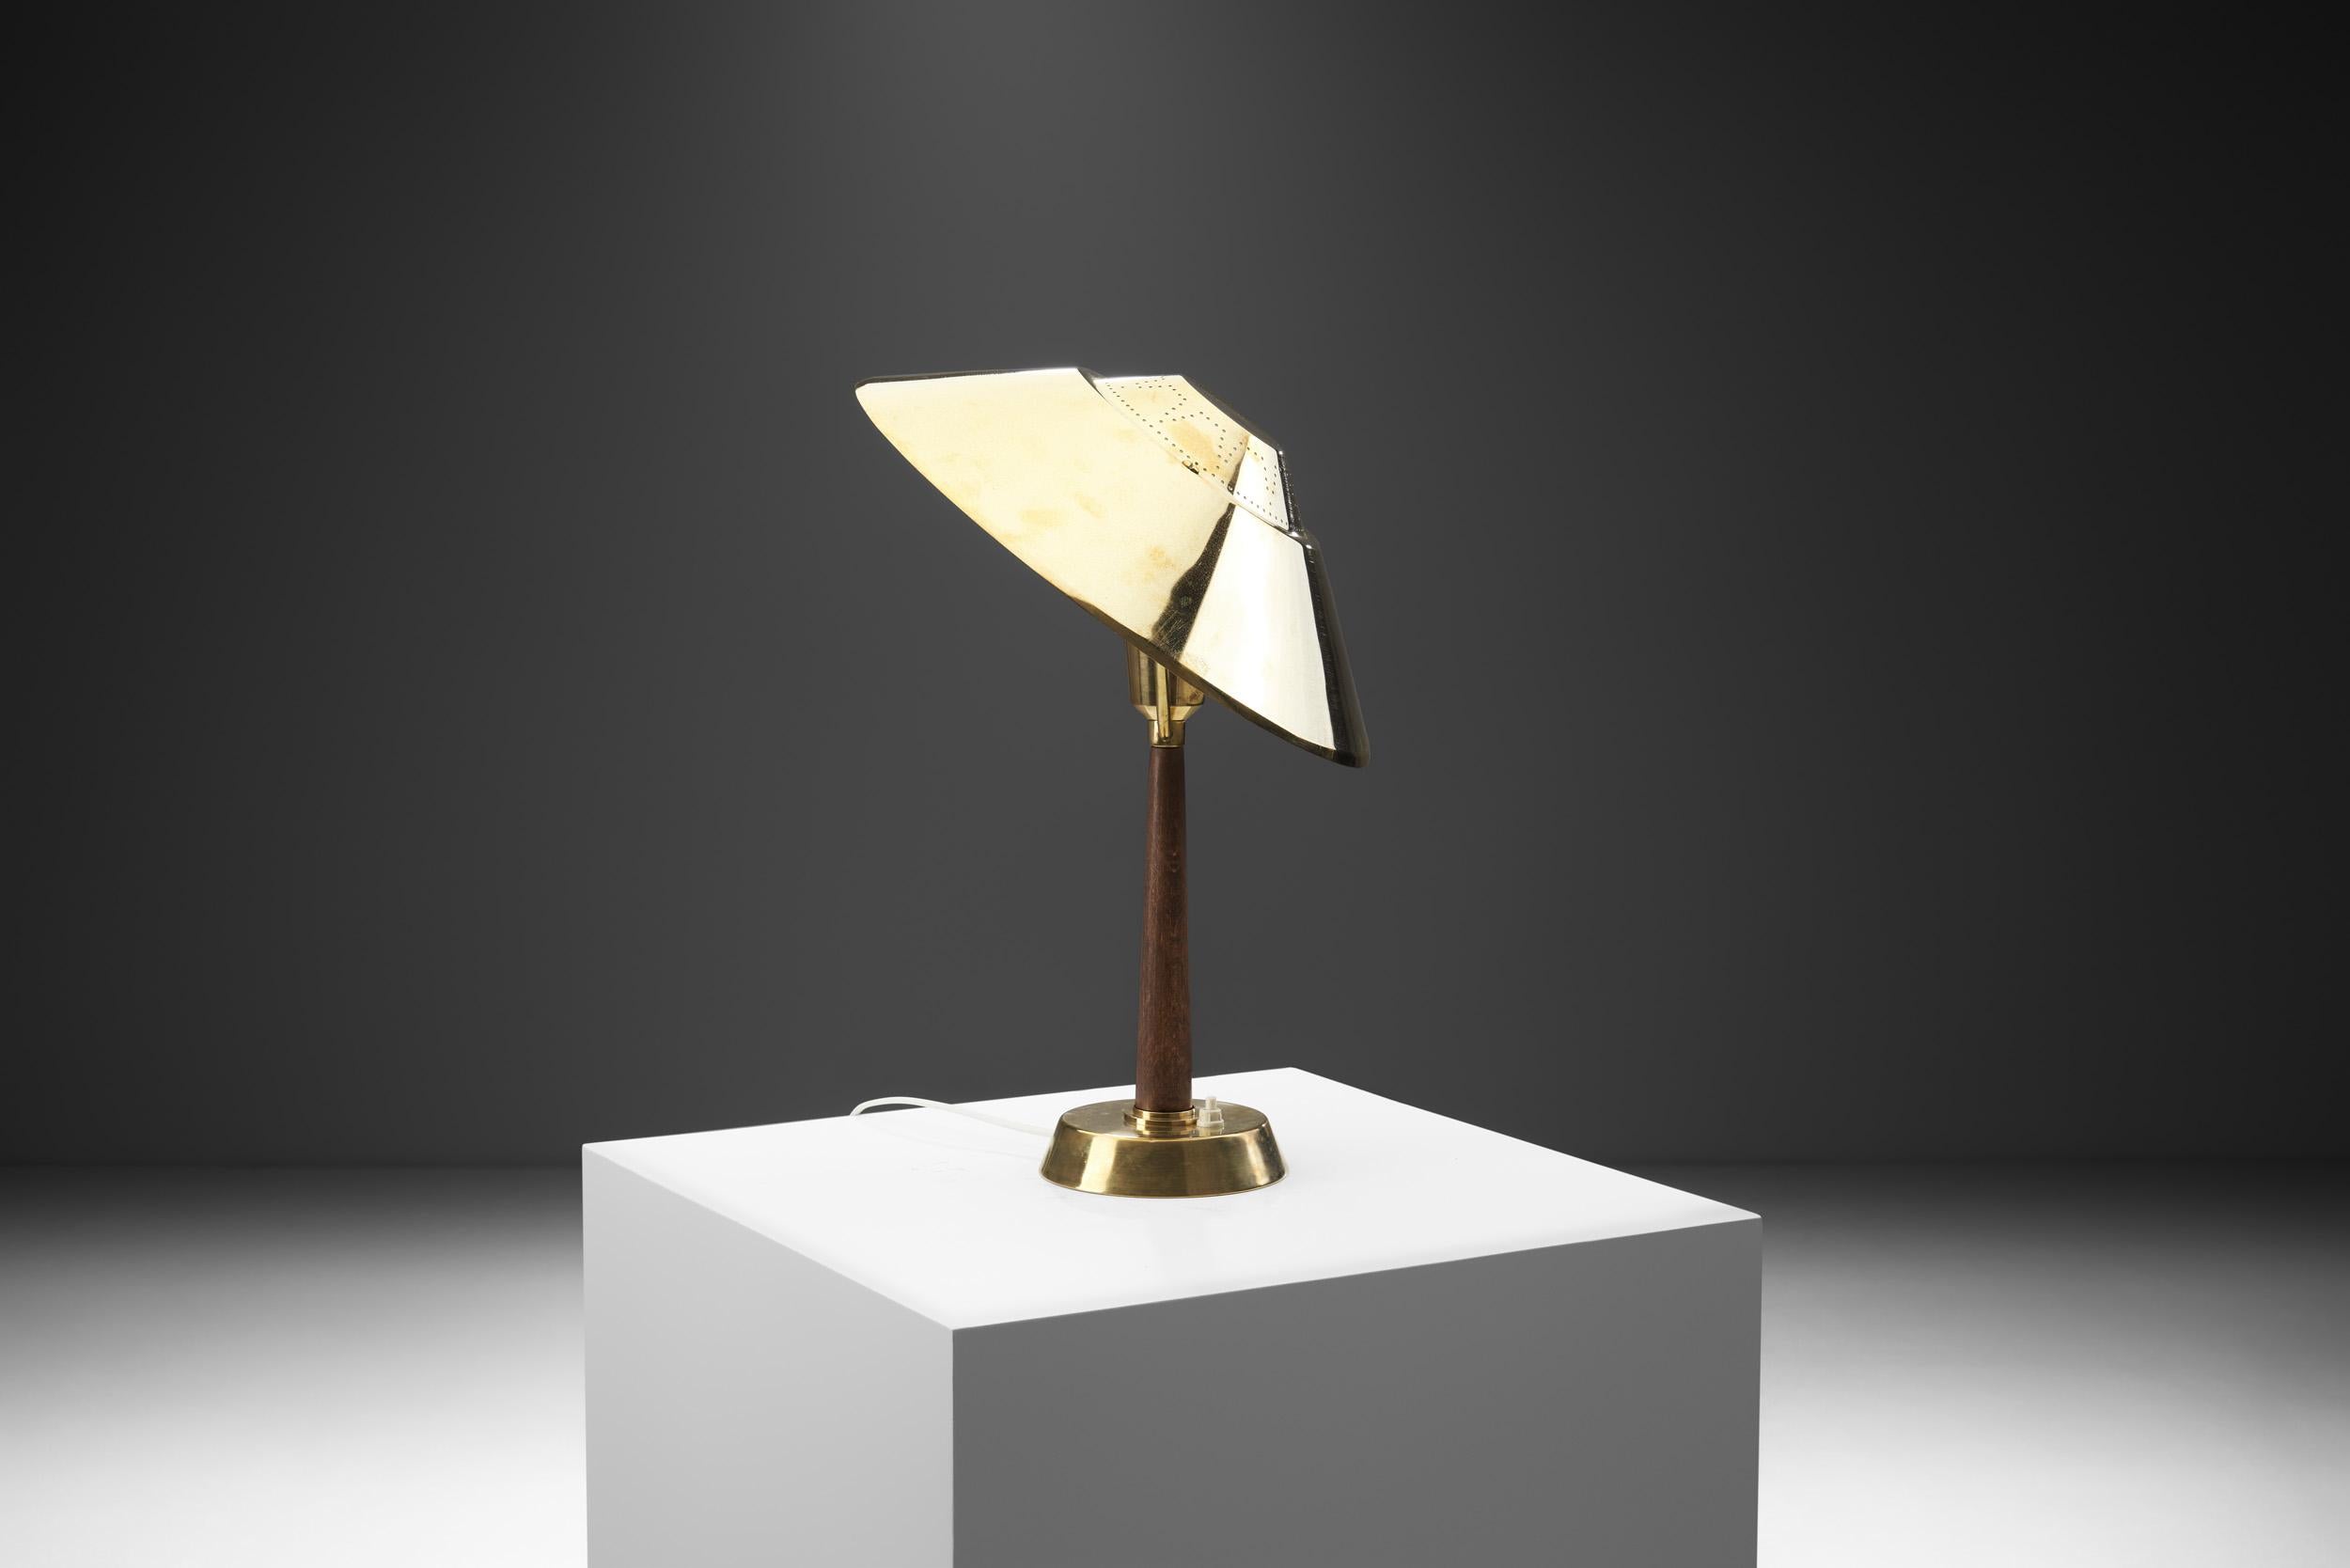 Mid-20th Century AB E. Hansson & Co. Brass Table Lamp with Adjustable Shade, Sweden 1950s For Sale